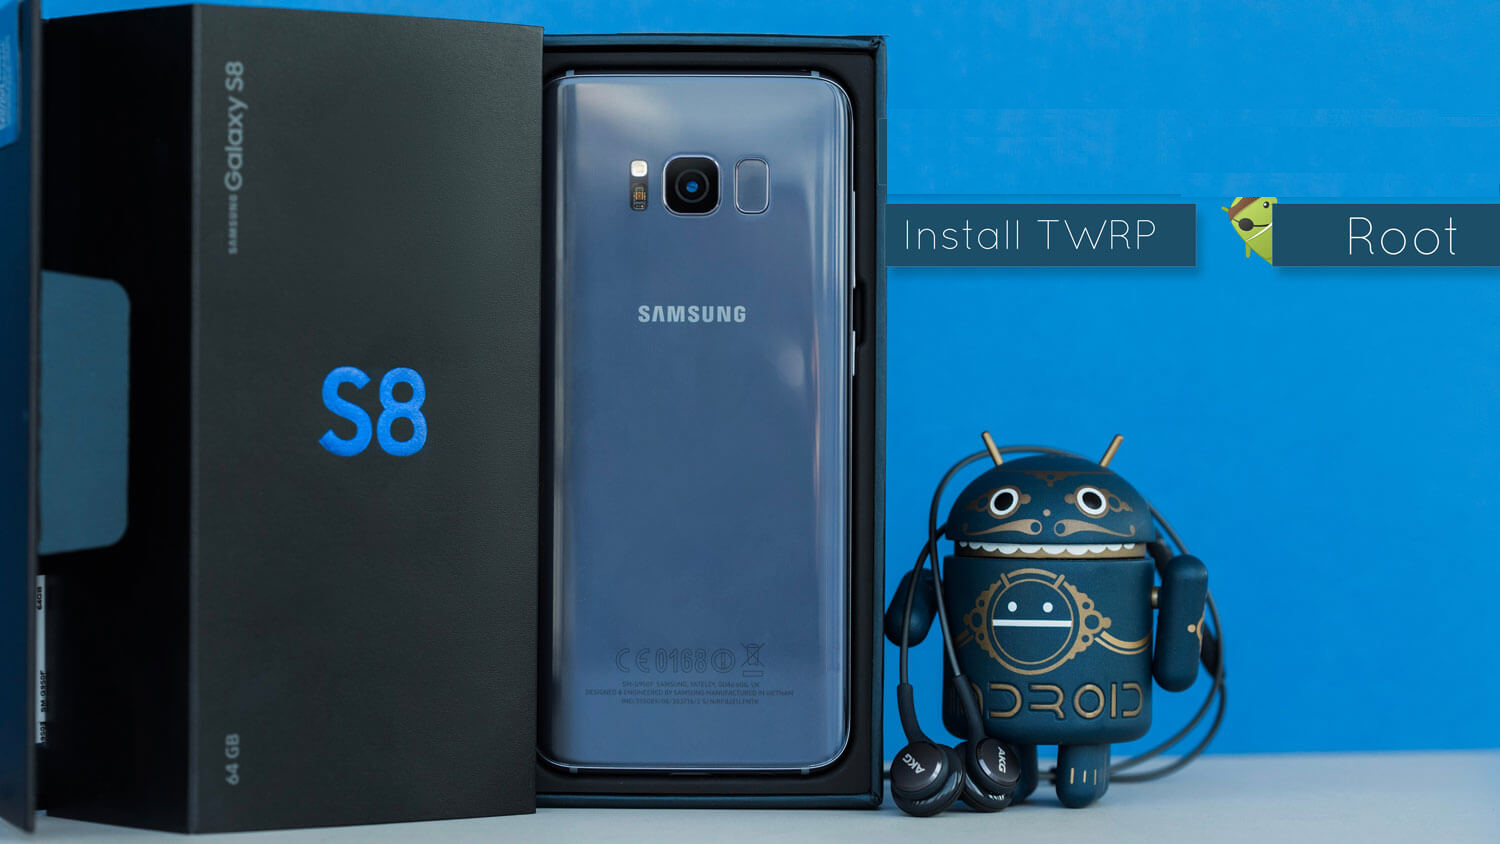 How To Install TWRP And Root Galaxy S8